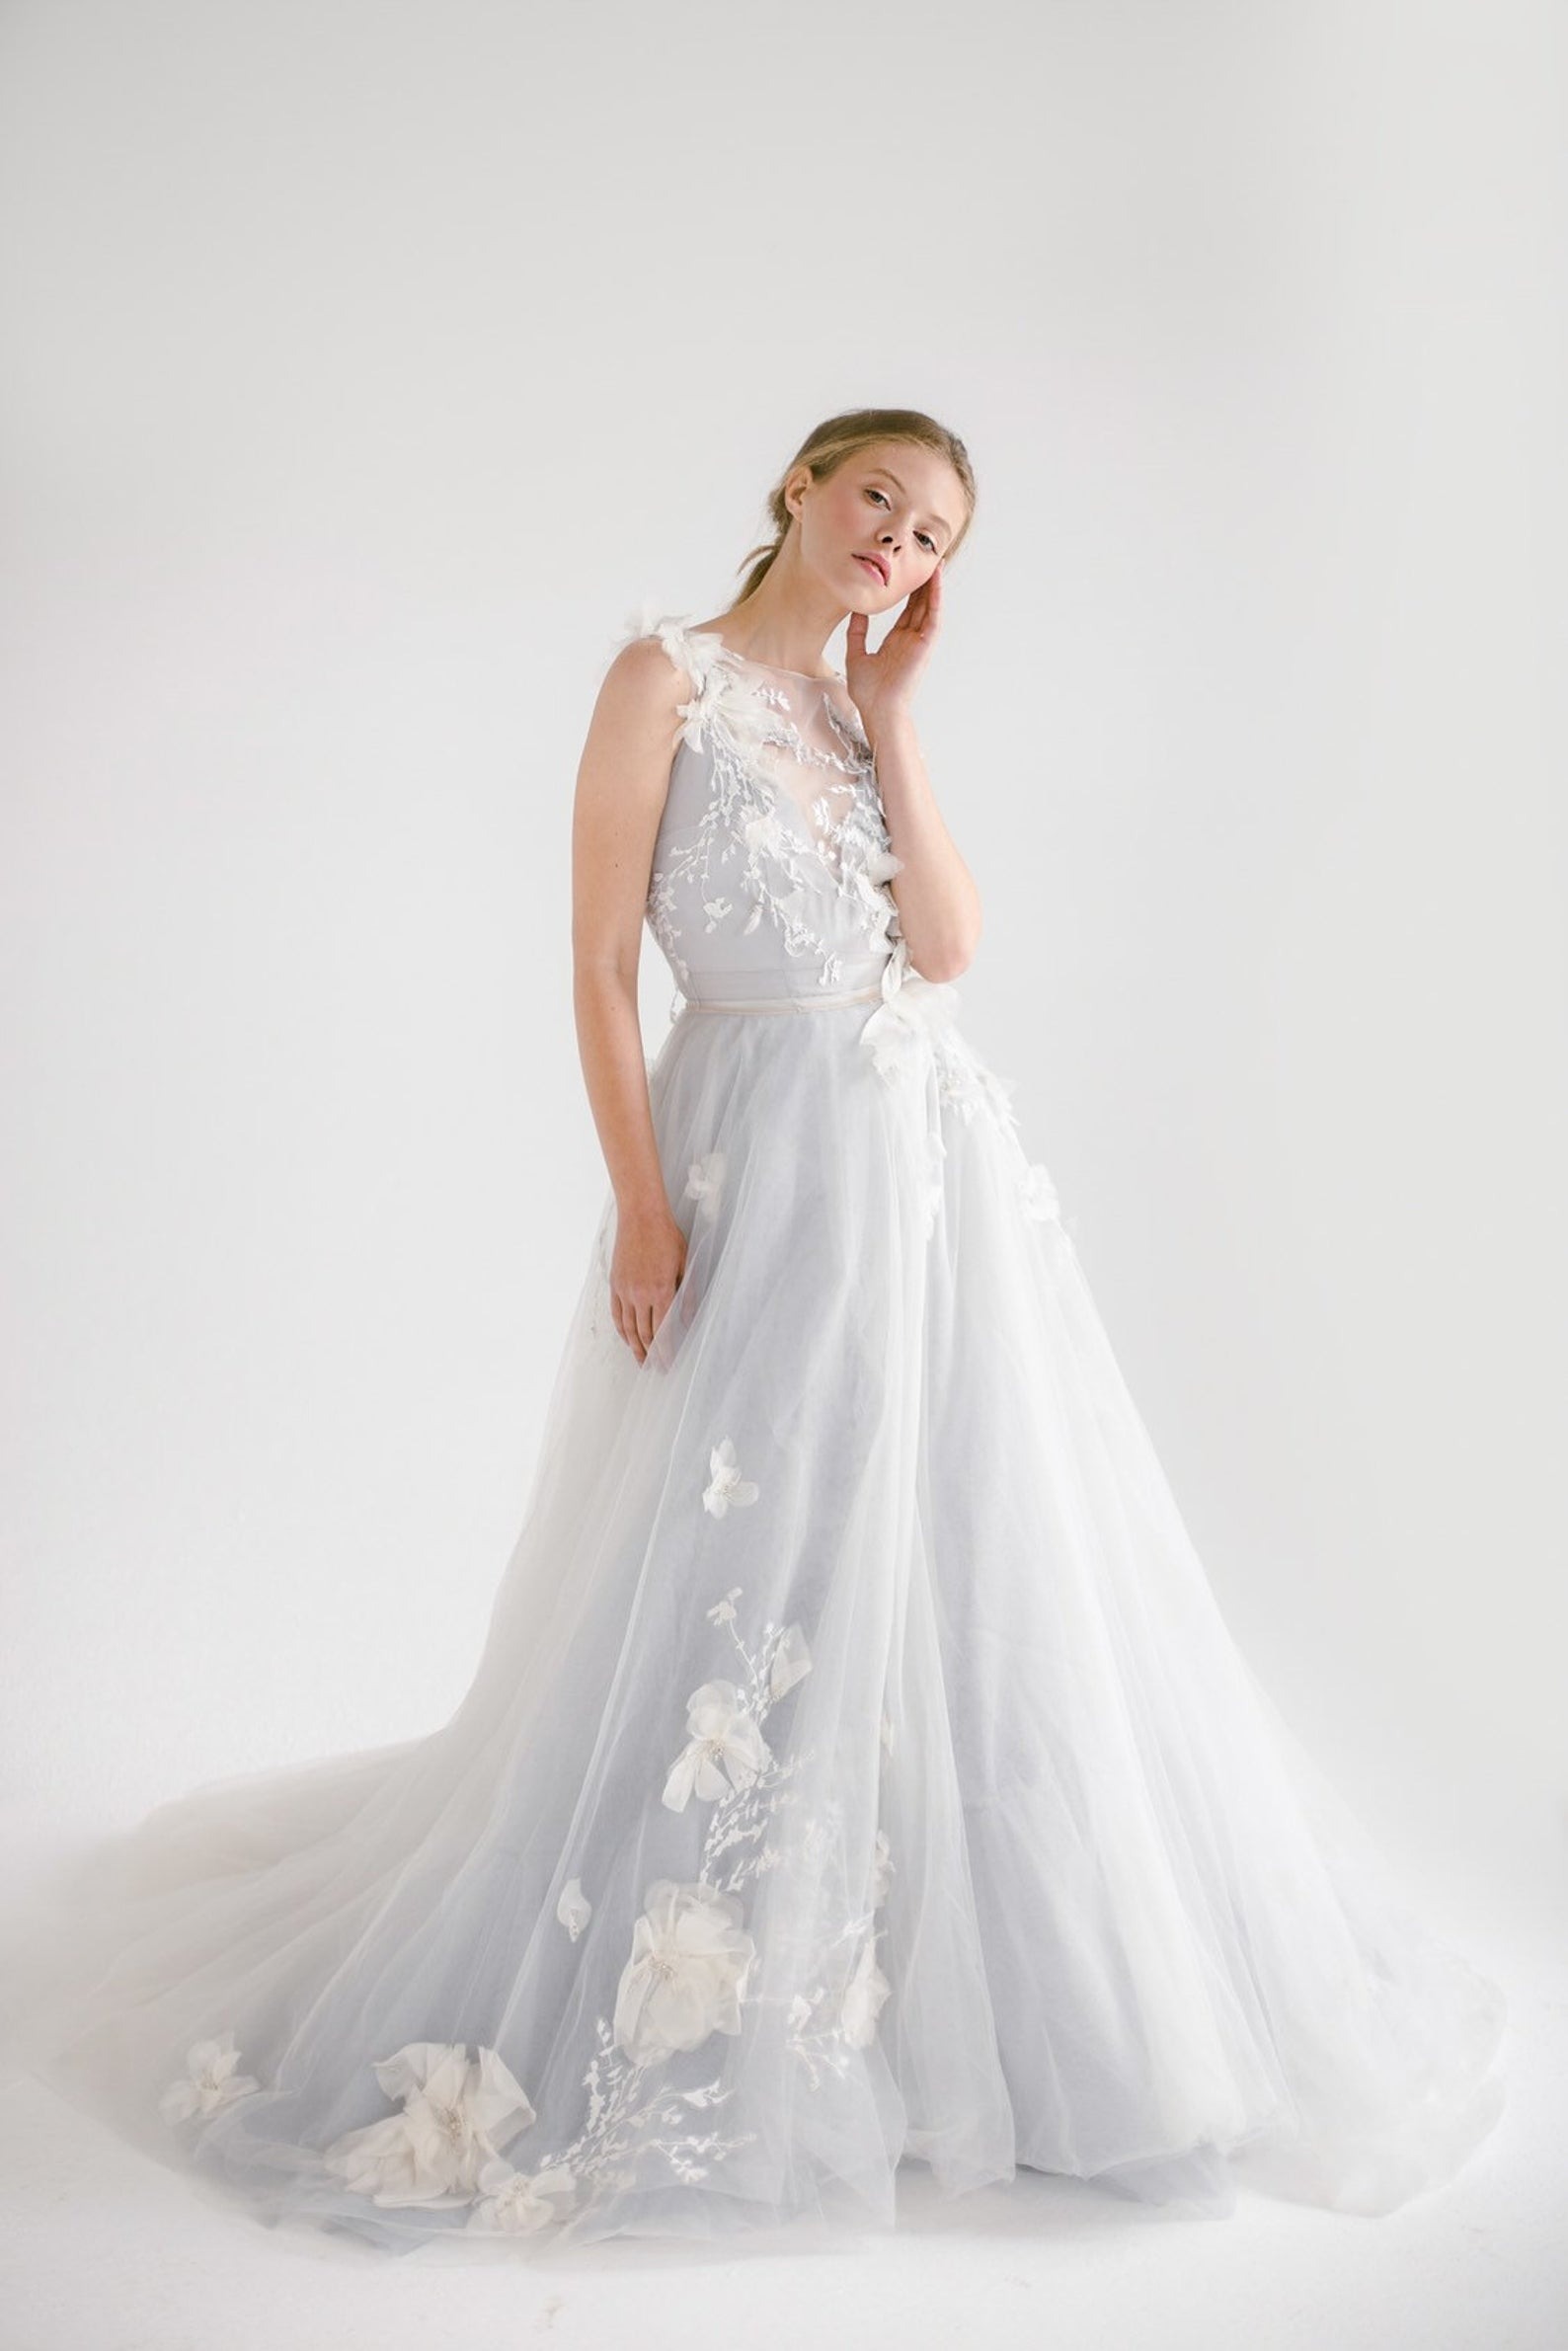 tulle floral online wedding dresses from Mywony Bridal on Etsy